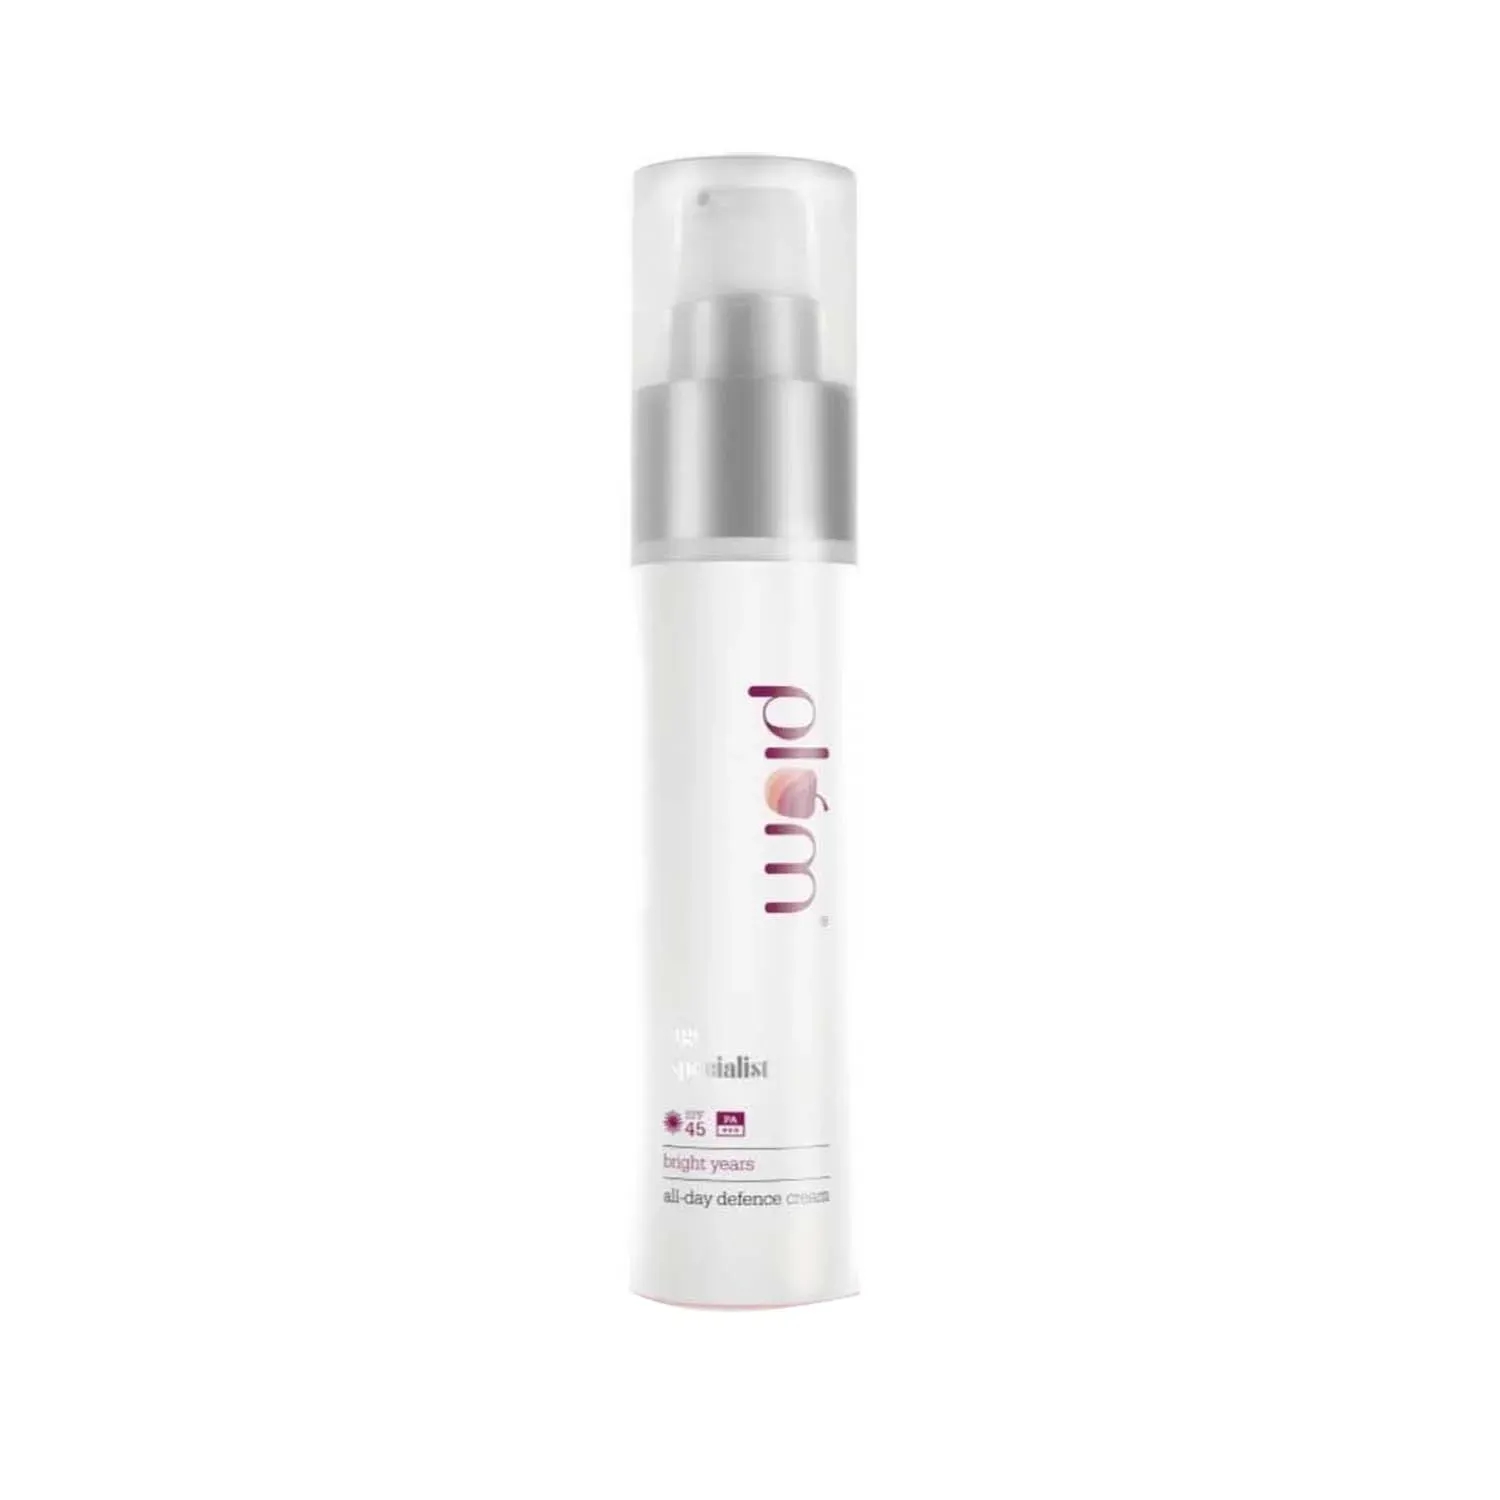 Plum Bright Years All-Day Defence Cream  PA+++ 45 - (50ml)